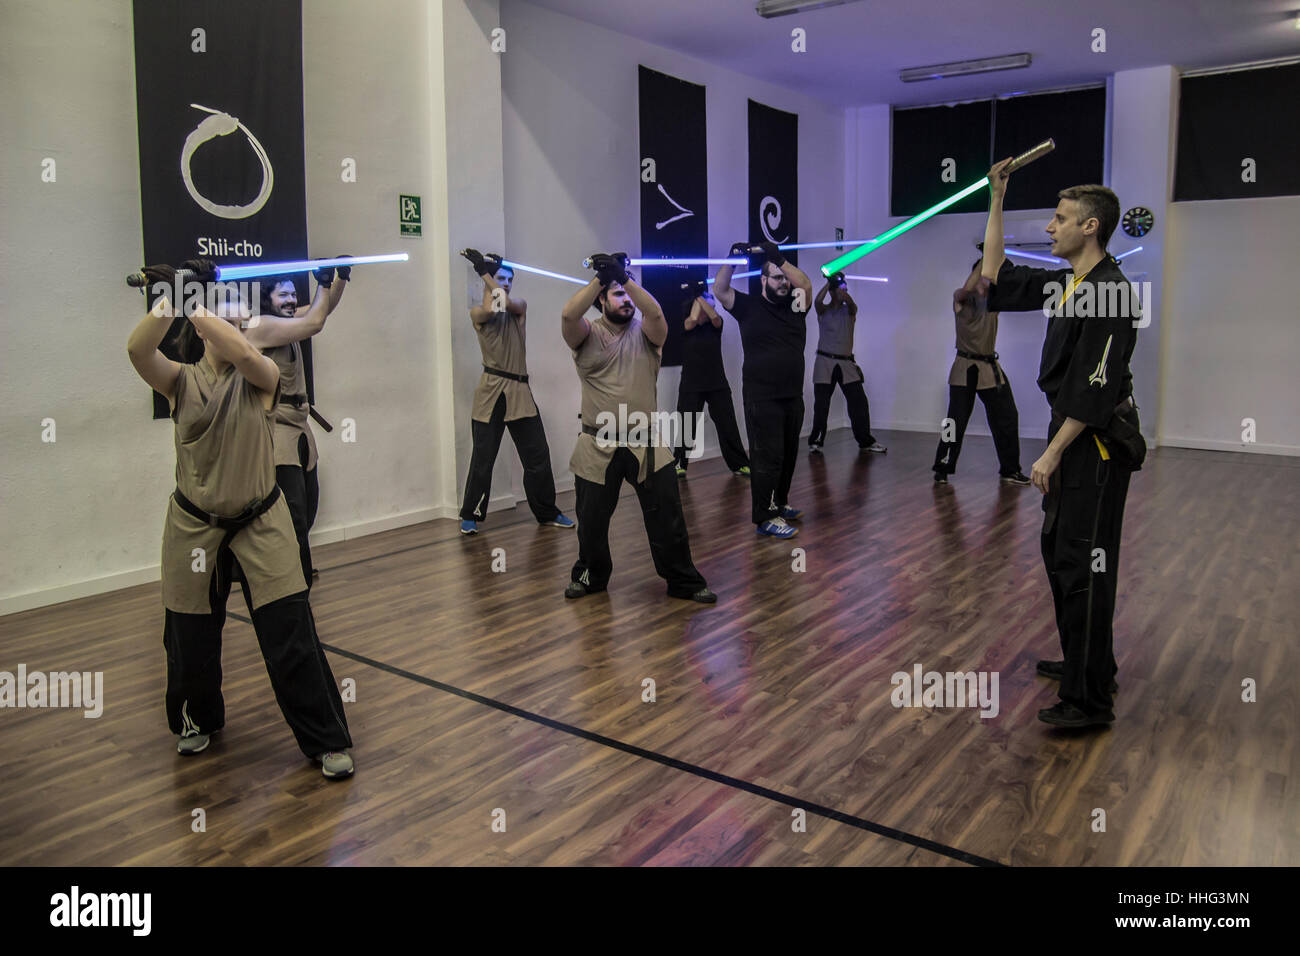 Madrid, Spain. 19th January, 2017. Gulliermo Serra and Ricardo Navarro brought from Italy to Spain the padawan sport. This sport was found in 2006 by three Italian teachers who studied the combat details of the 'Star Wars' franchise of movies. Credit: Alberto Sibaja Ramírez/Alamy Live News Stock Photo